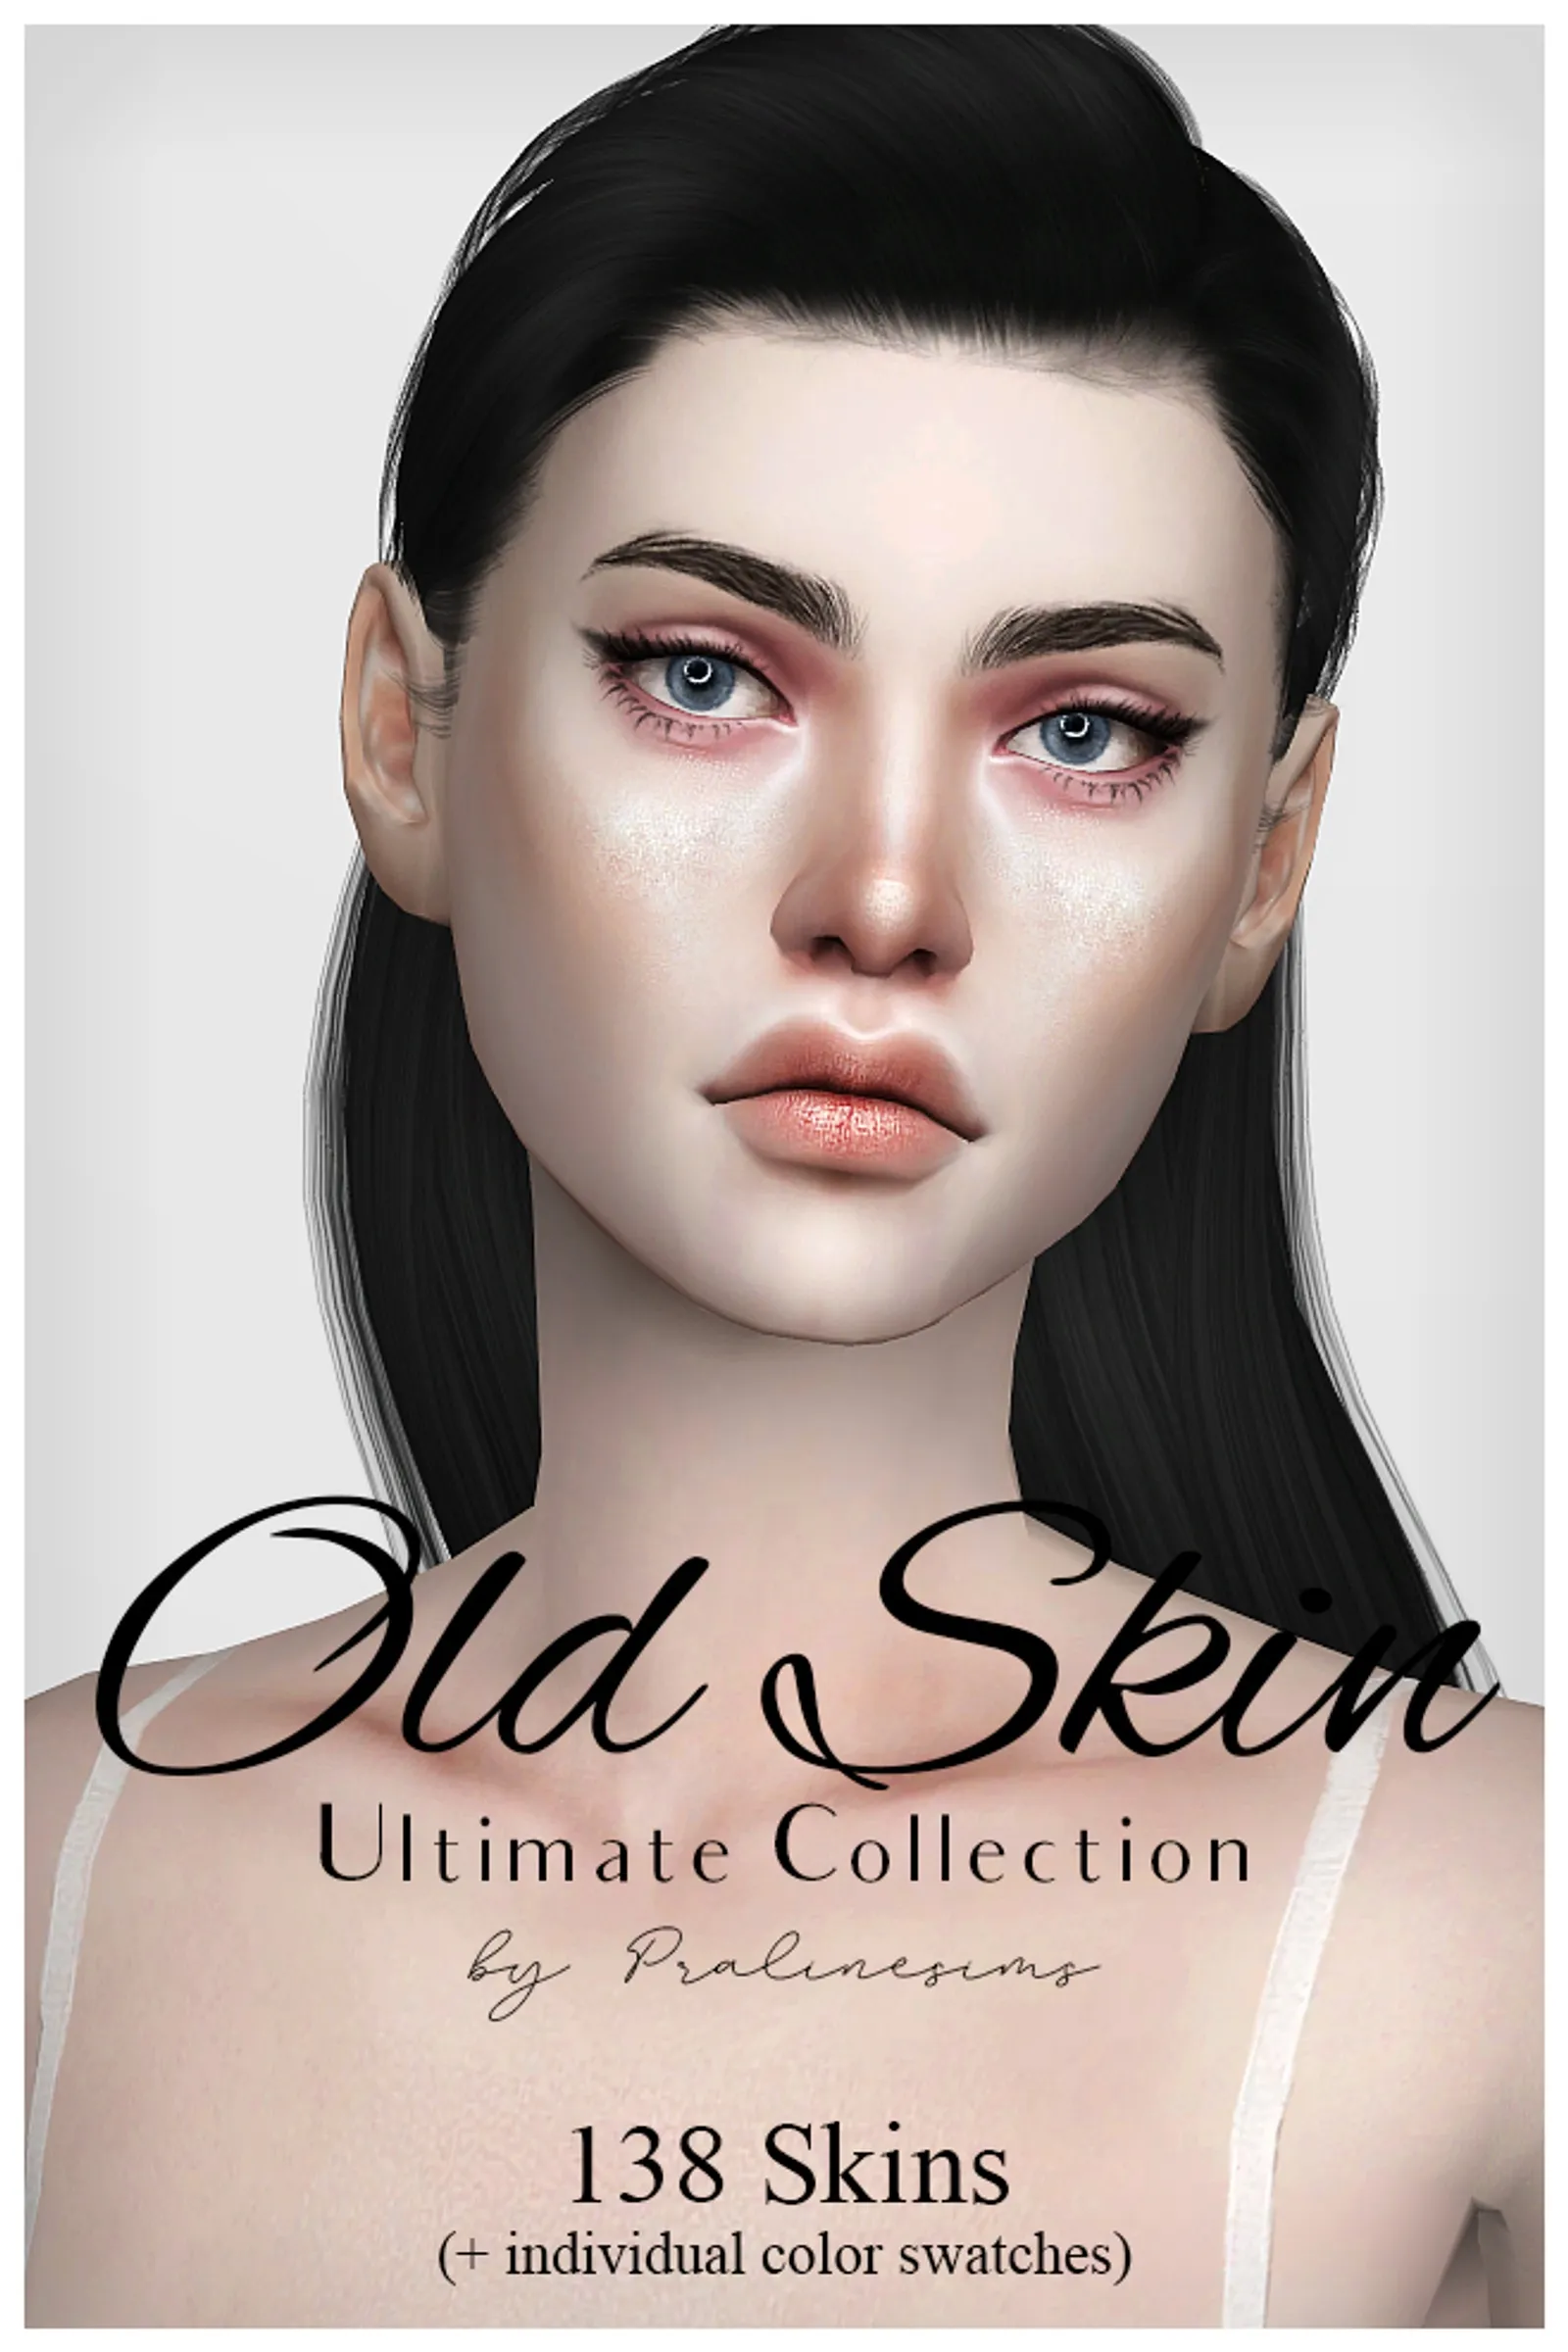 OLD SKIN Ultimate Collection